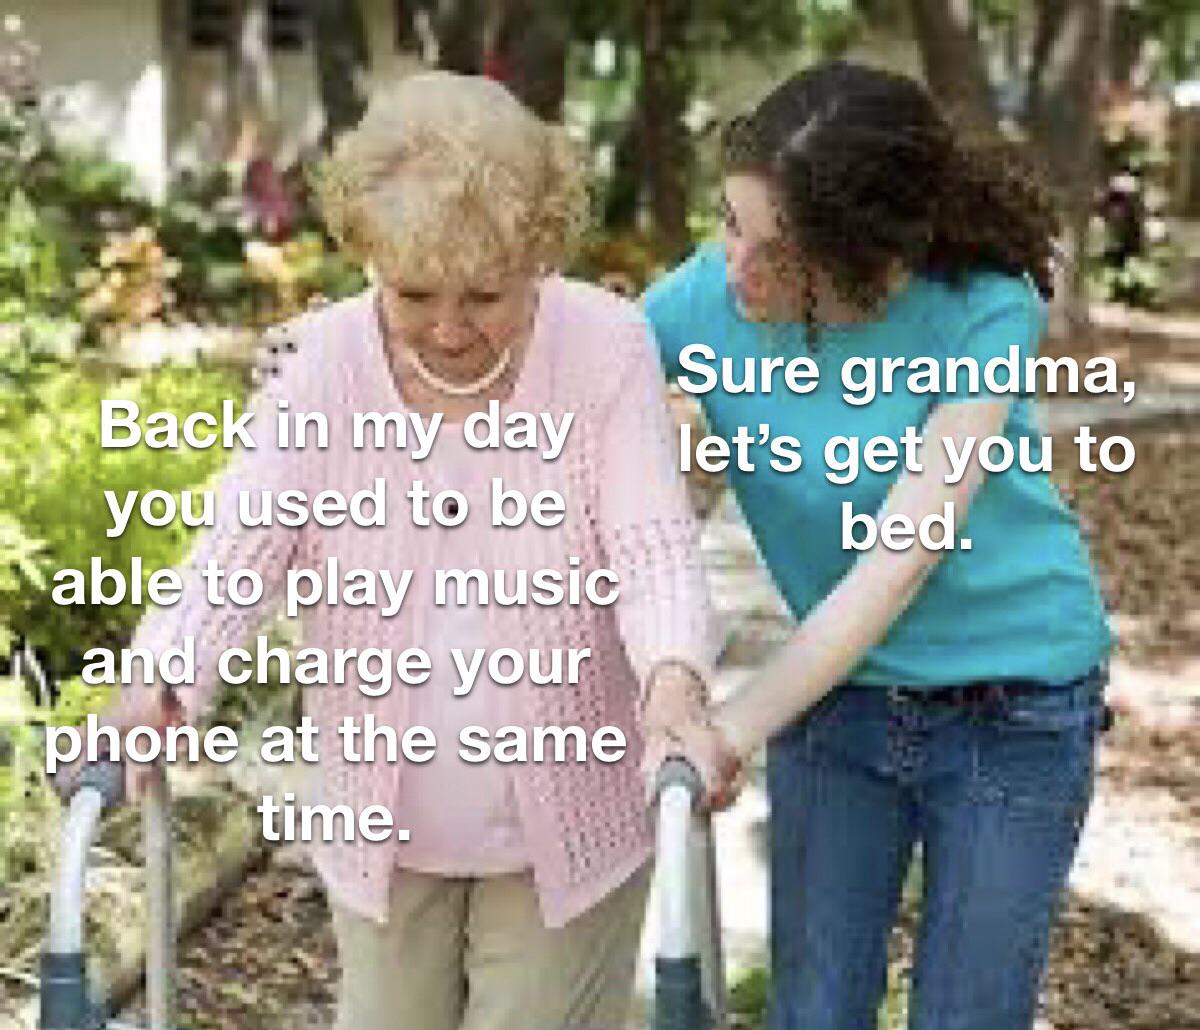 funny memes and pics - okay grandma lets get you to bed meme template - Back in my day you used to be able to play music and charge your phone at the same time. Sure grandma, let's get you to bed.